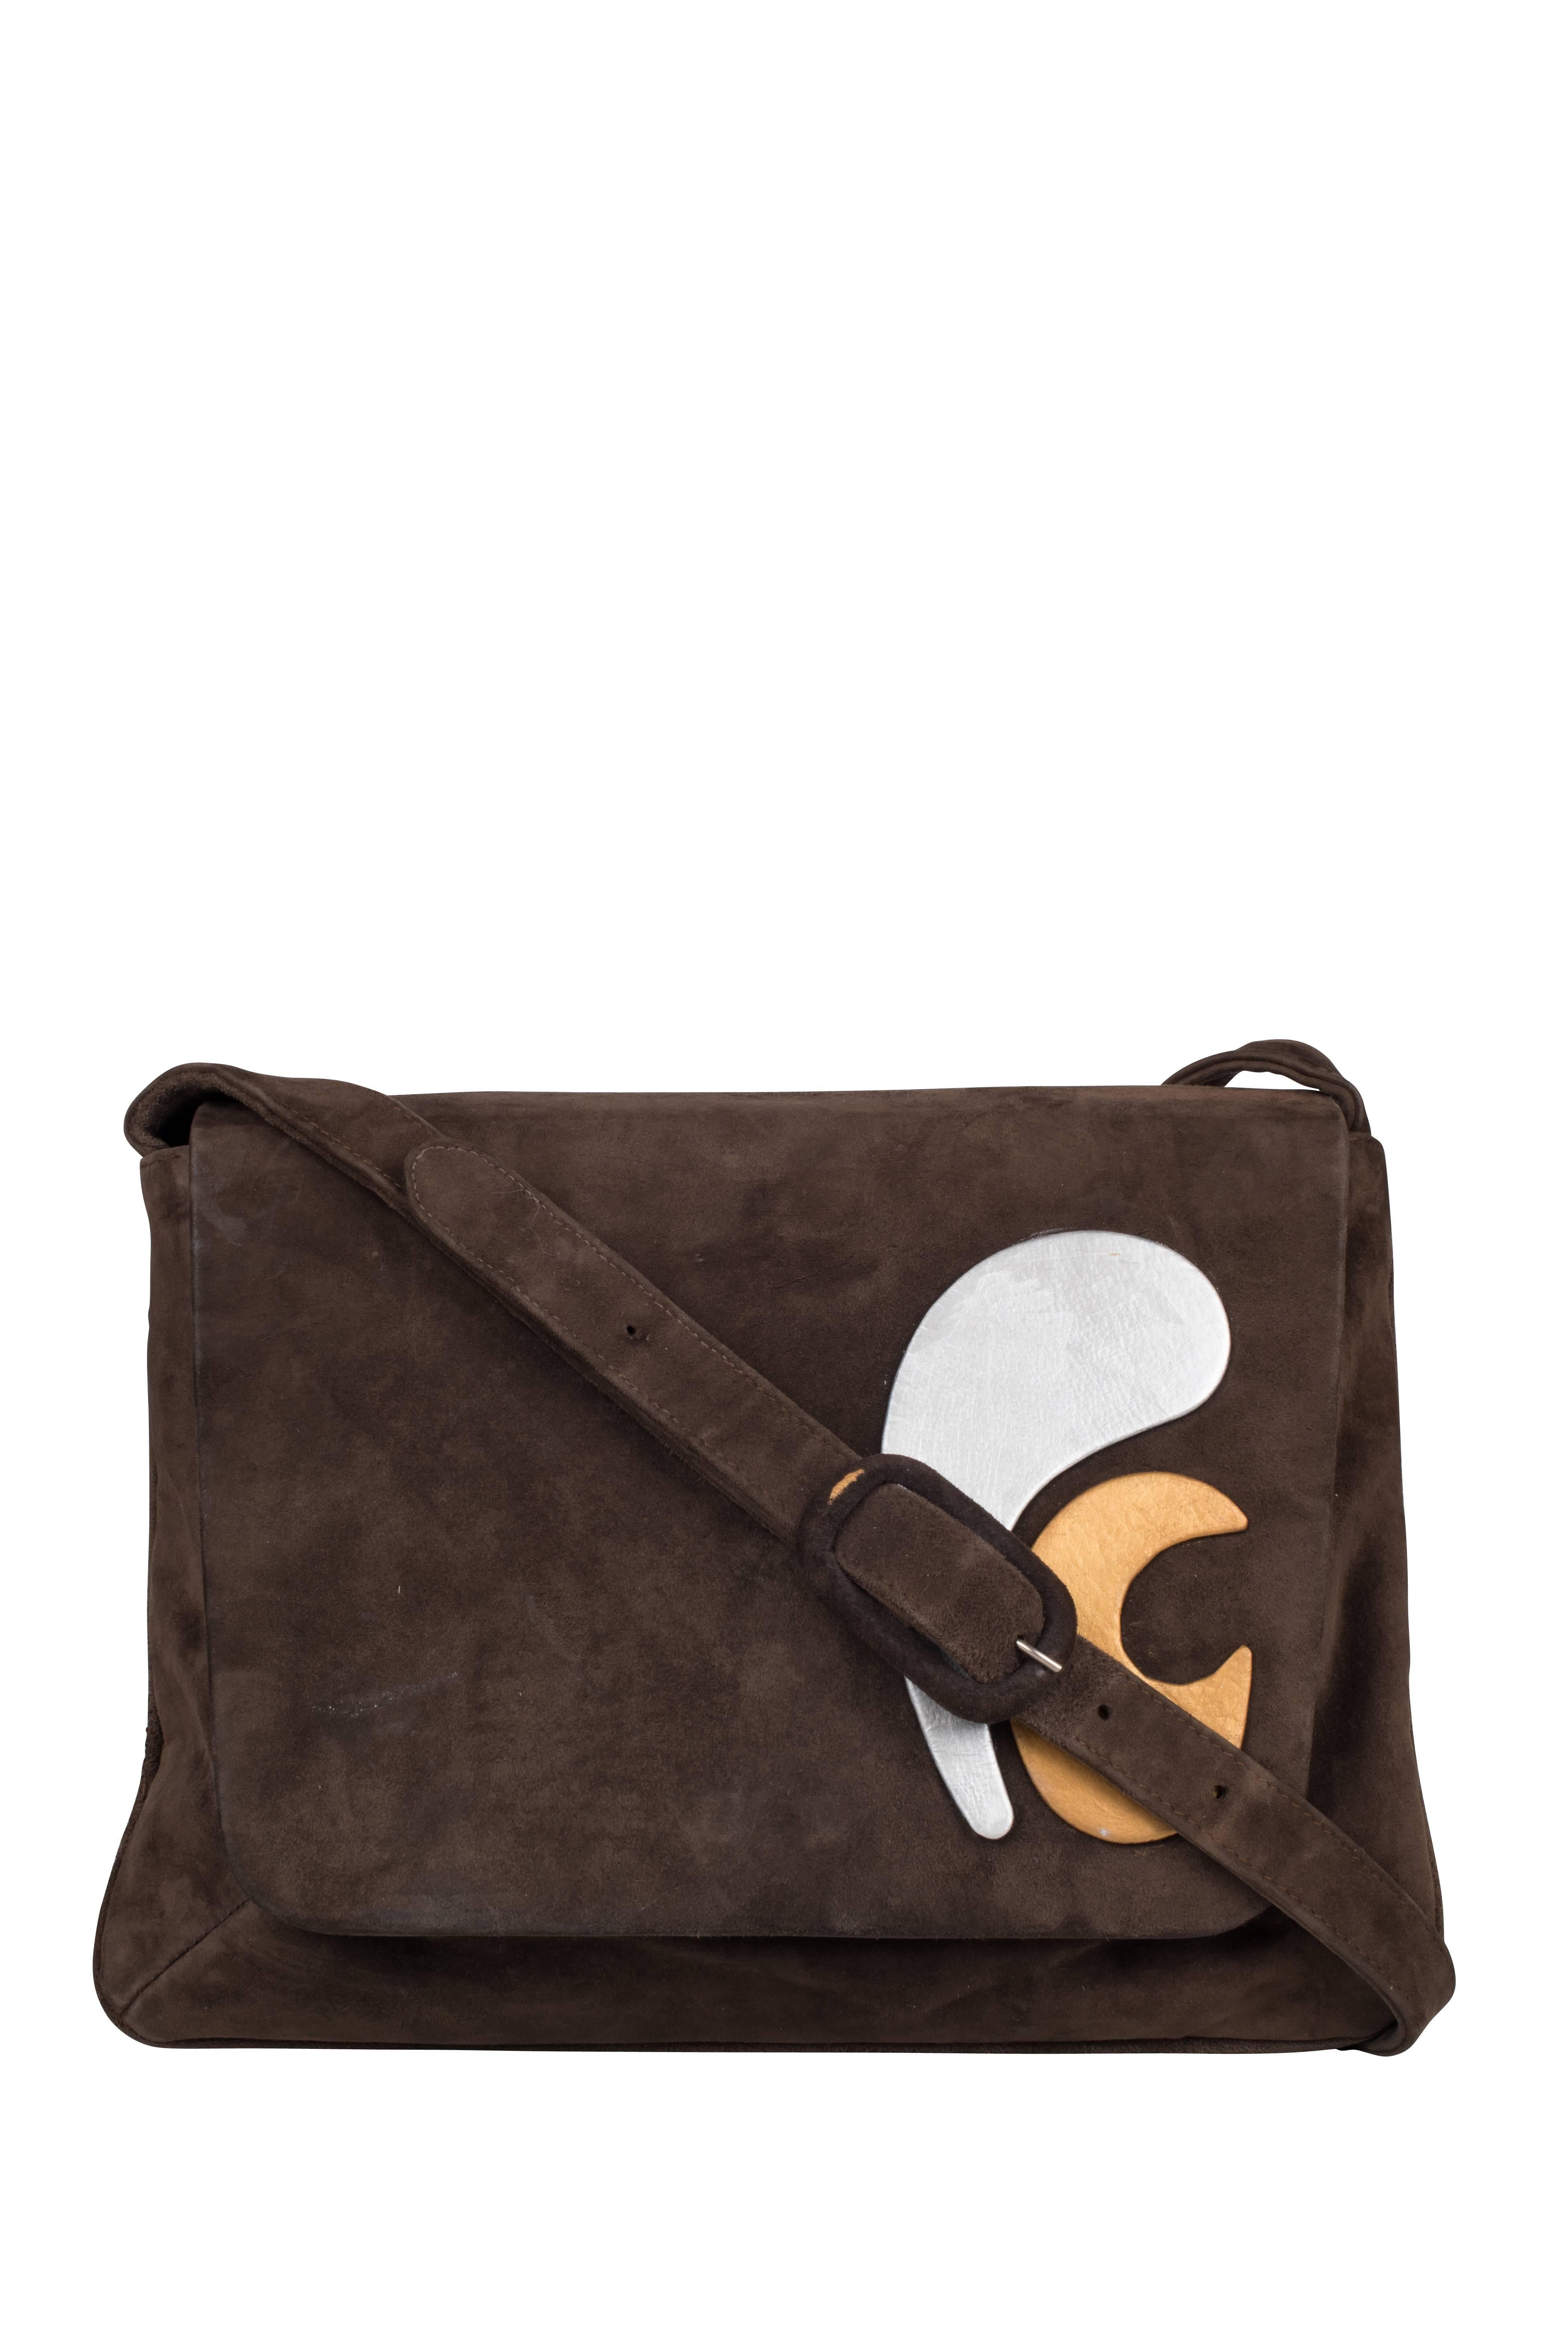 A 1960's brown suede bag by Pierre Cardin. Made from soft brown suede, the bag has an adjustable strap with three holes. The flap is embellished with the designer's initials in space-age leather cut-outs in silver and gold. The inside is made of